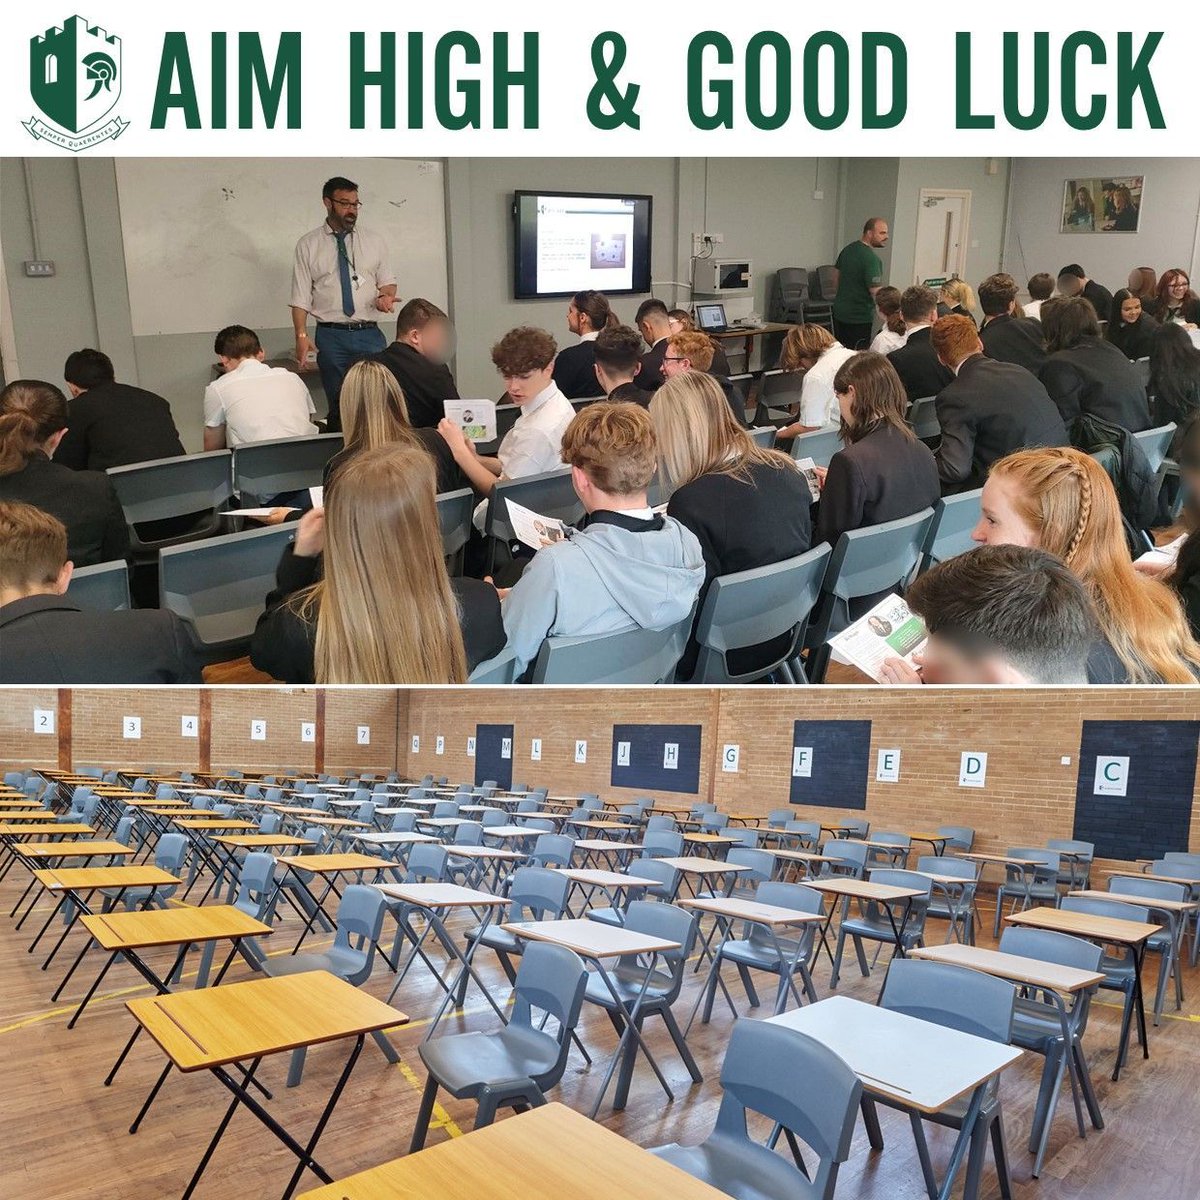 Our summer exams have started today and will continue until Friday 21st June. We would like to wish all the students involved in Year 11 and 13 the very best of luck. #ambition #aimhigh